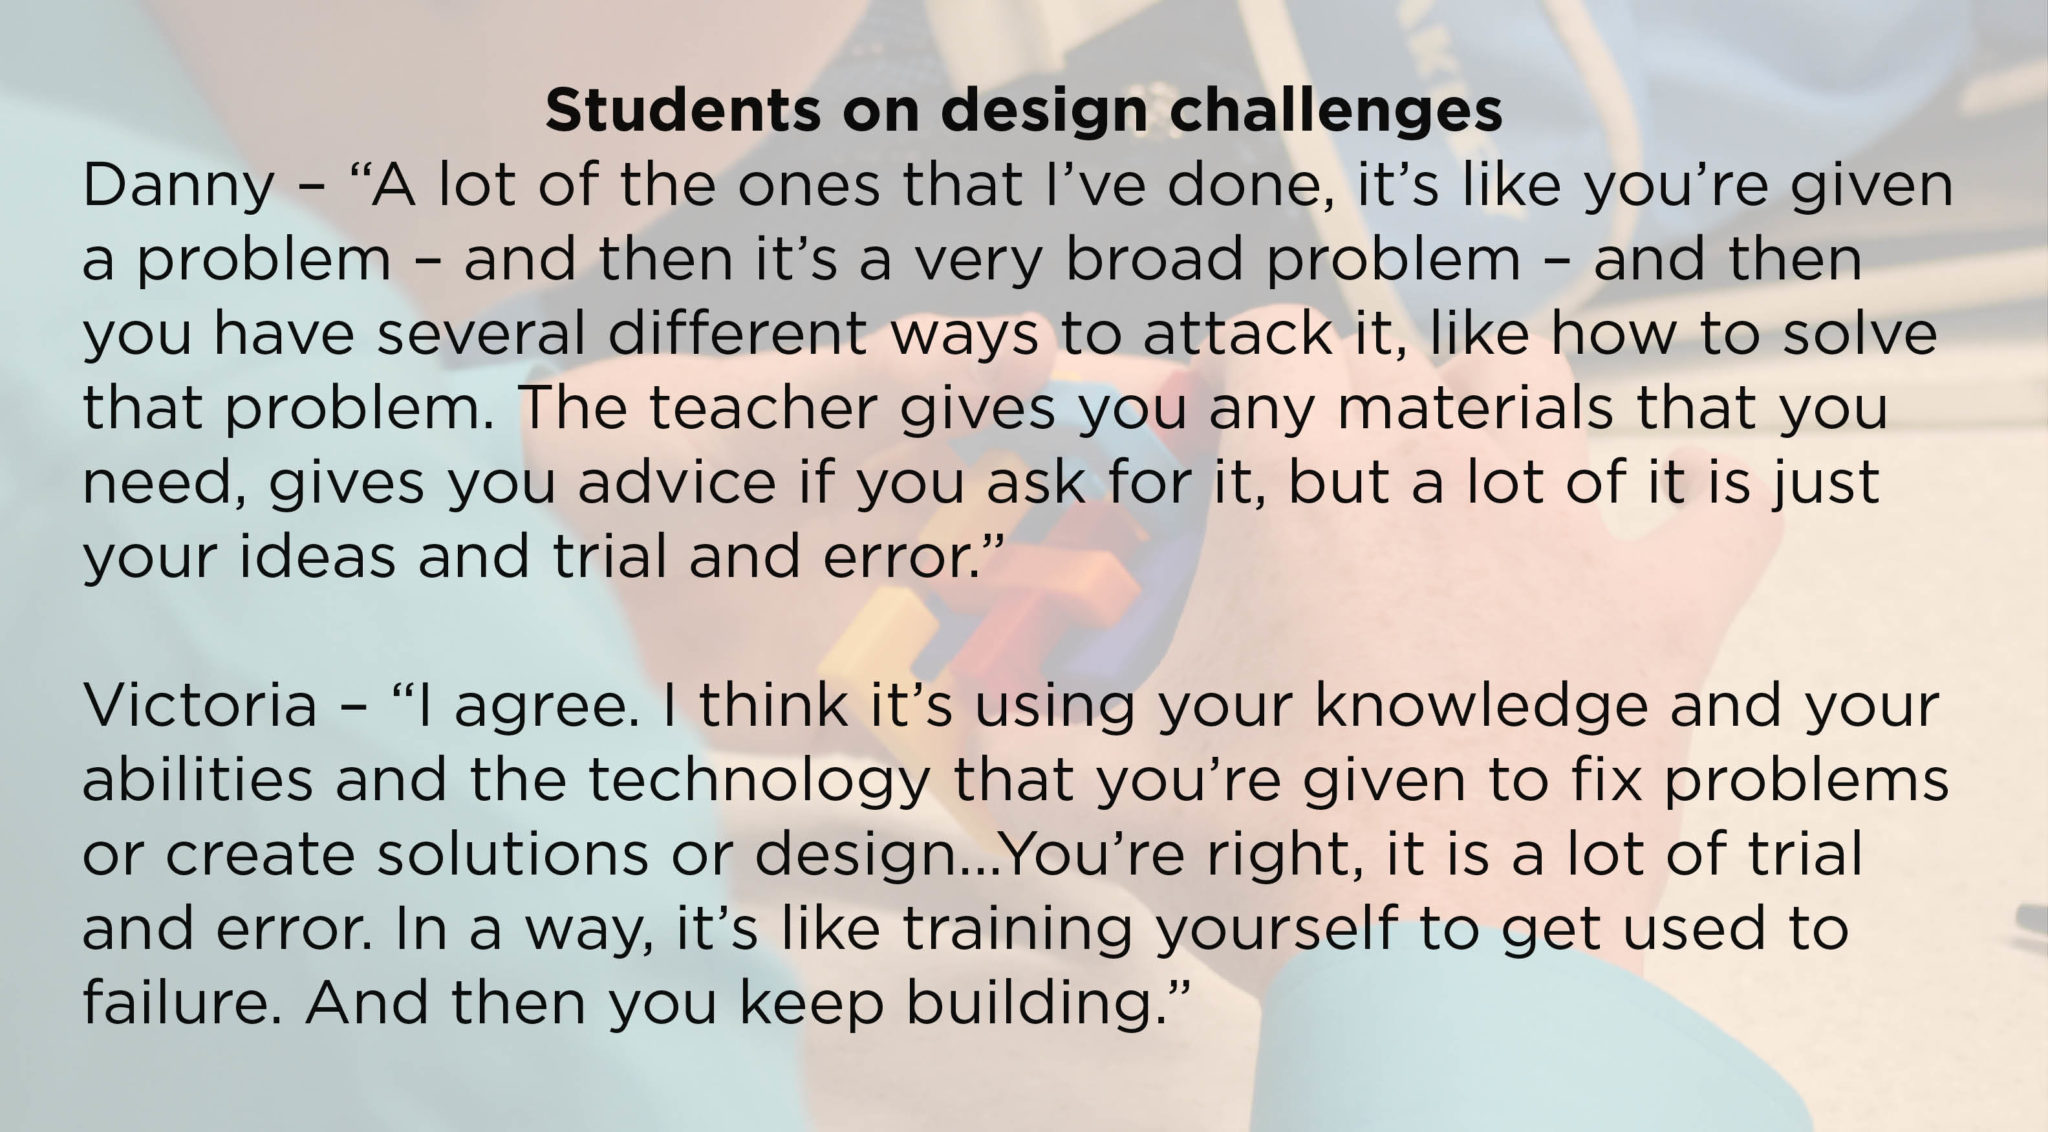 Students on design challenges Danny – “A lot of the ones that I’ve done, it’s like you’re given a problem – and then it’s a very broad problem – and then you have several different ways to attack it, like how to solve that problem. The teacher gives you any materials that you need, gives you advice if you ask for it, but a lot of it is just your ideas and trial and error.” Victoria – “I agree. I think it’s using your knowledge and your abilities and the technology that you’re given to fix problems or create solutions or design...You’re right, it is a lot of trial and error. In a way, it’s like training yourself to get used to failure. And then you keep building.”